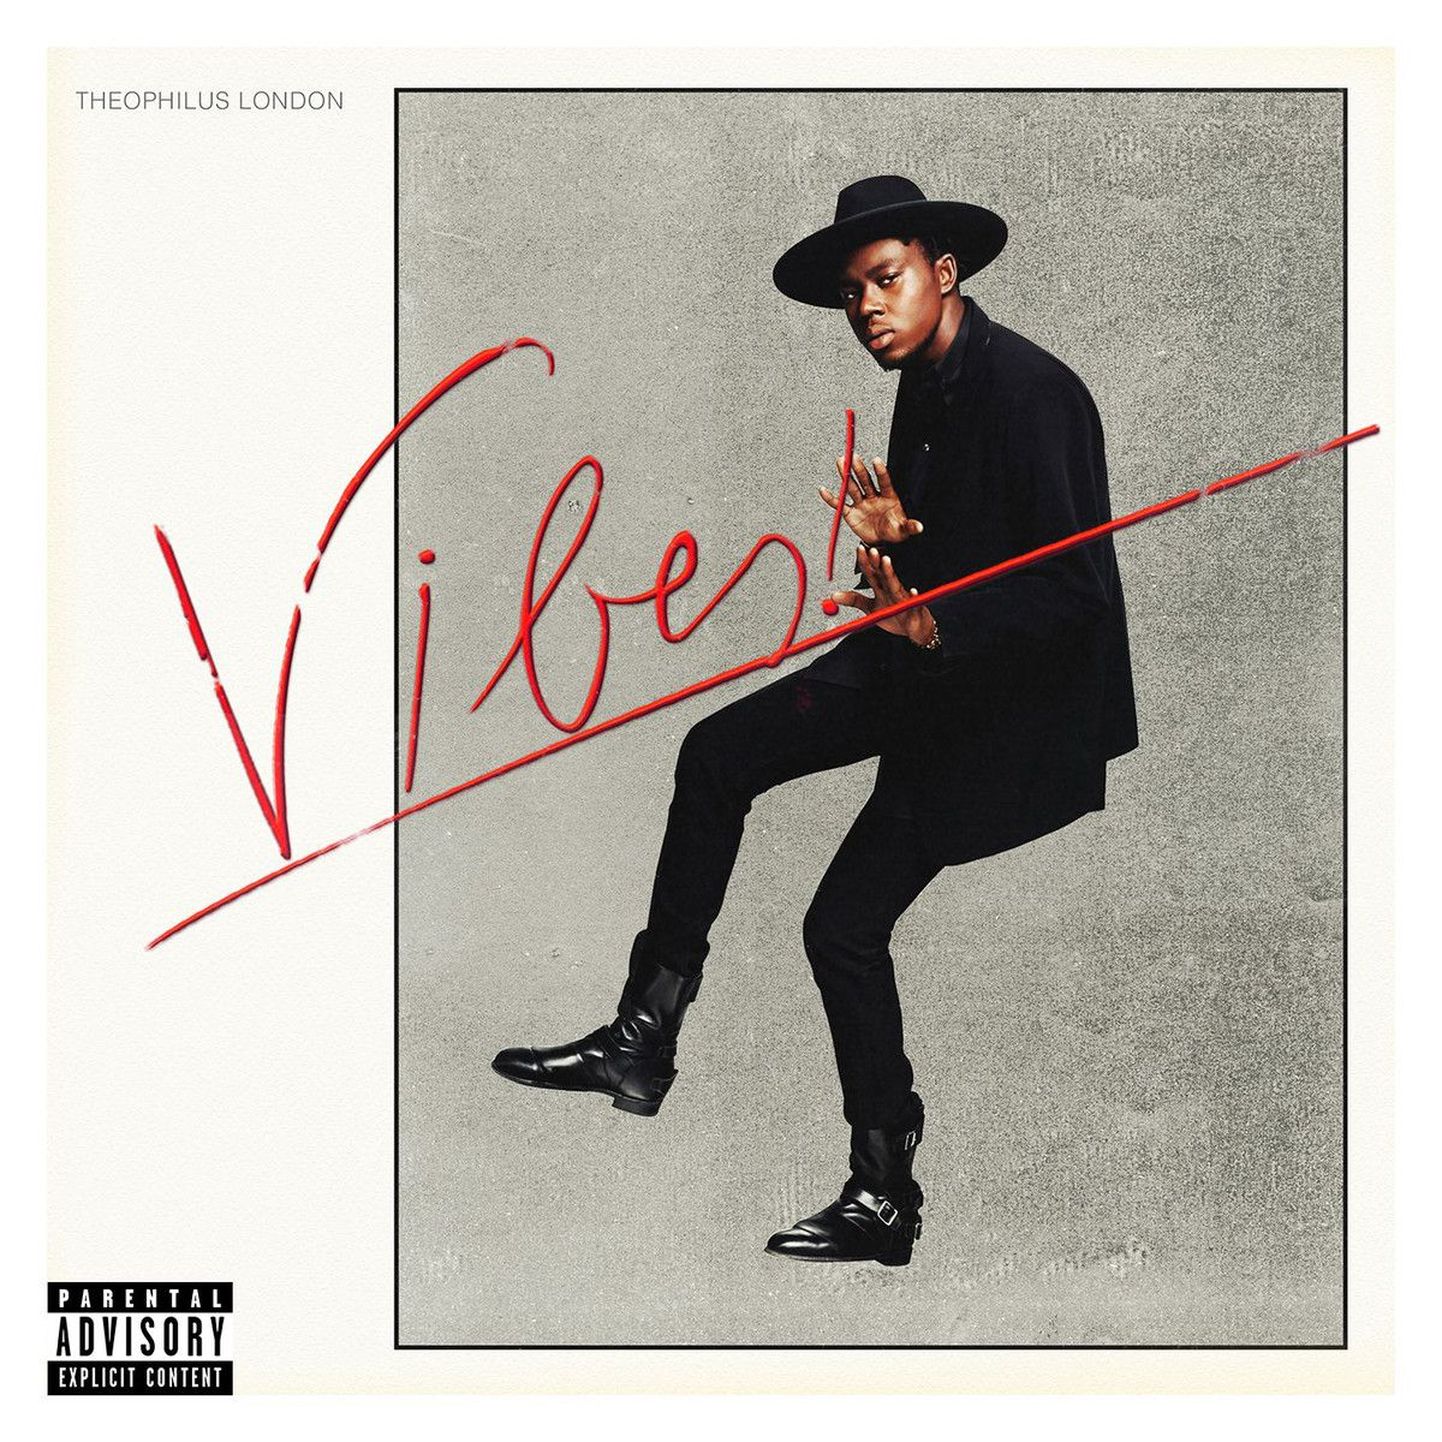 Theophilus London-Vibes!